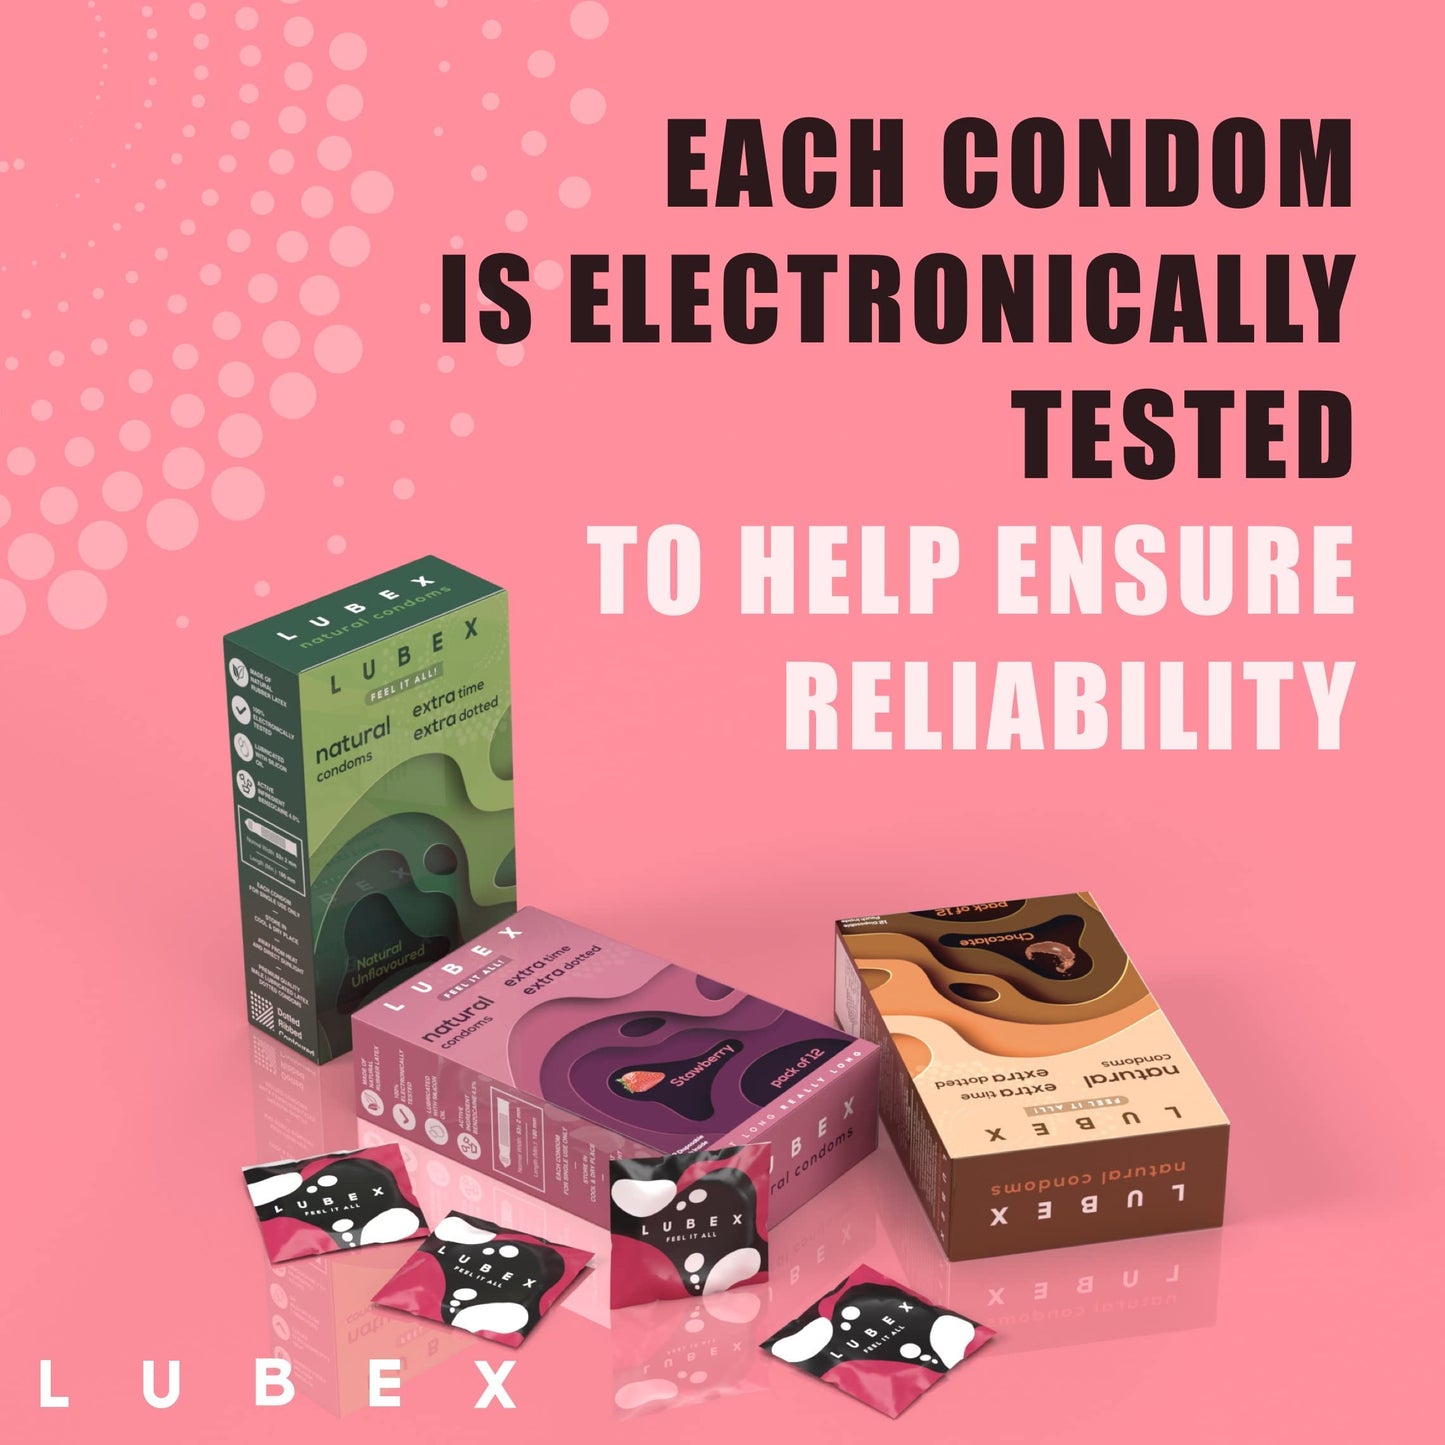 Lubex 6 in 1 Long Lasting Condoms with Disposable Bags - Ultra Thin & Extra Dotted - 12 Condom (Pack of 1)